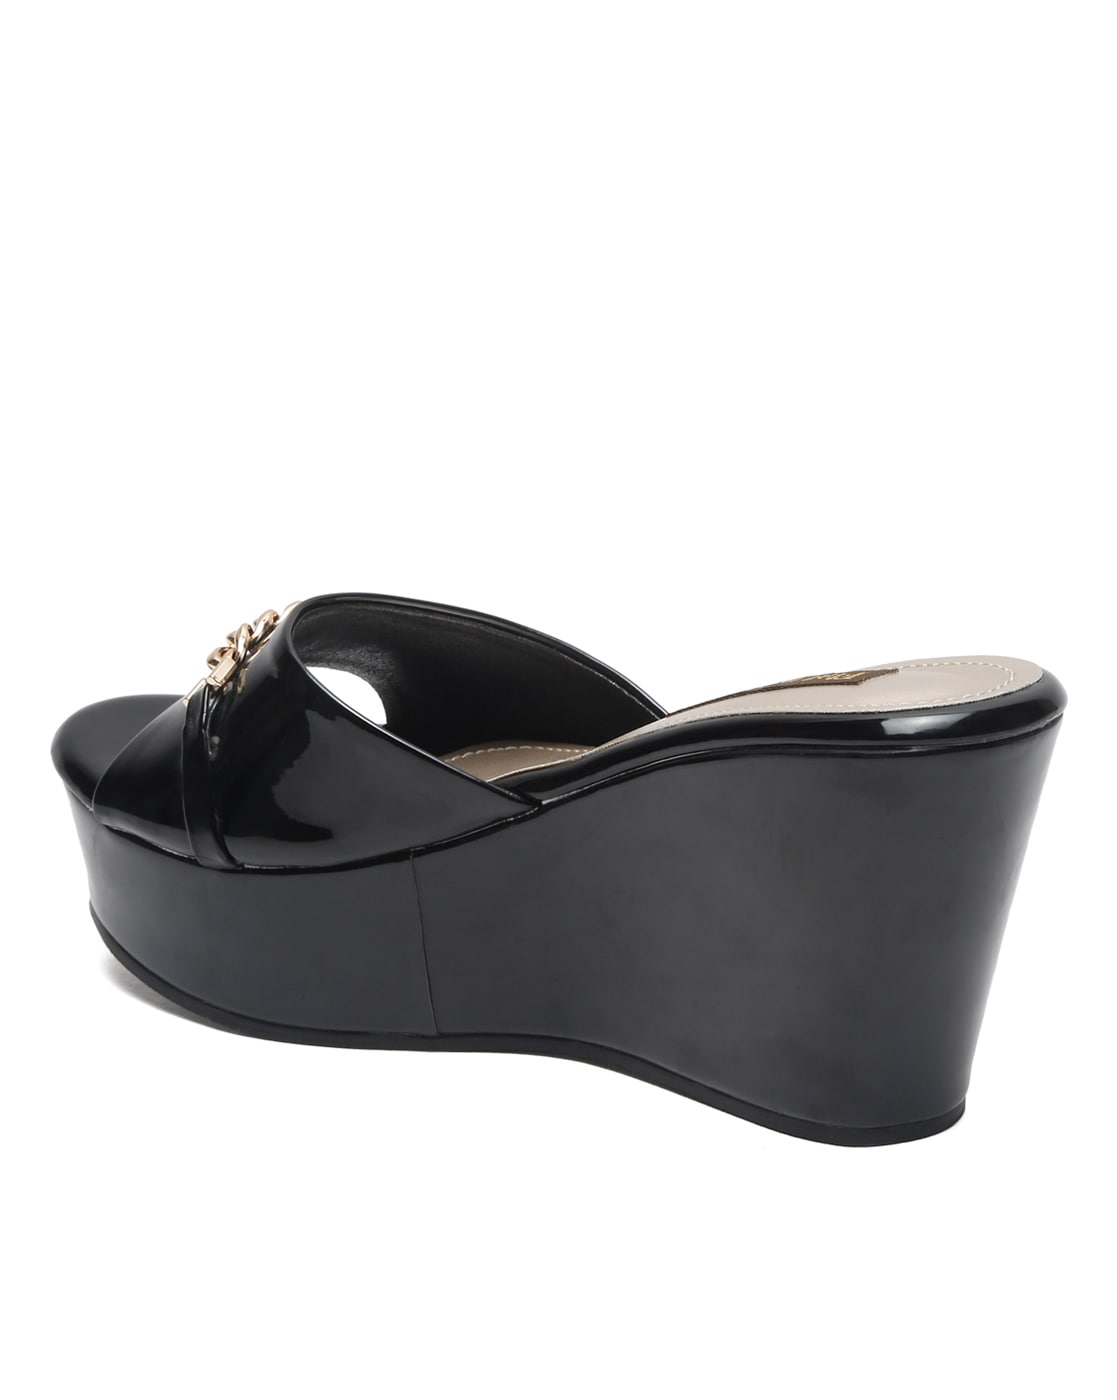 Paloma Barceló Wedge Sandals in Black | Lyst